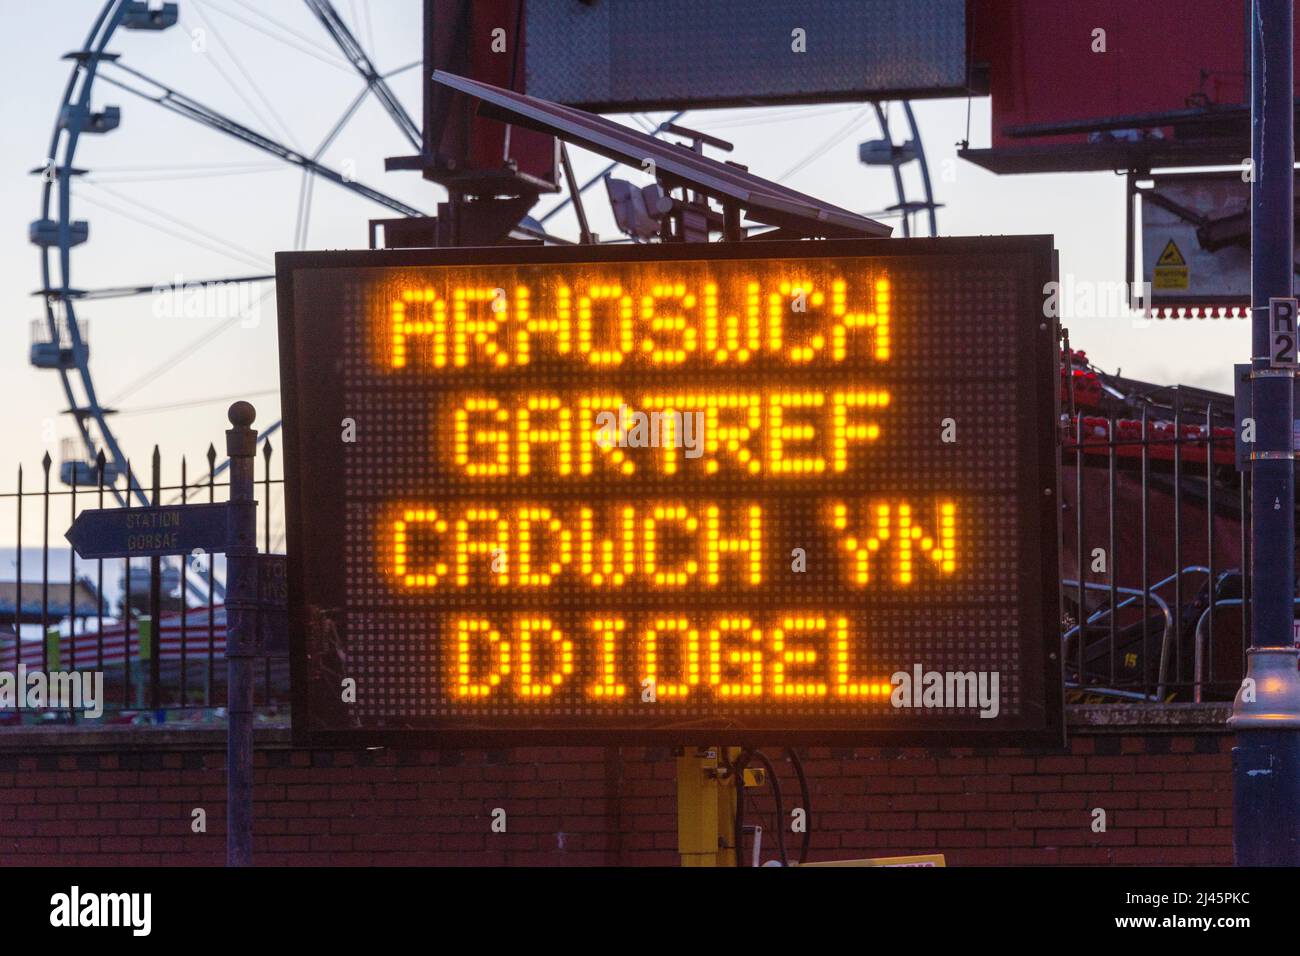 Transportable illuminated sign at Barry Island during Covid 19 pandemic. Message in  Welsh arhoswch gartref cadwch yn ddiogel, stay home stay safe. Stock Photo